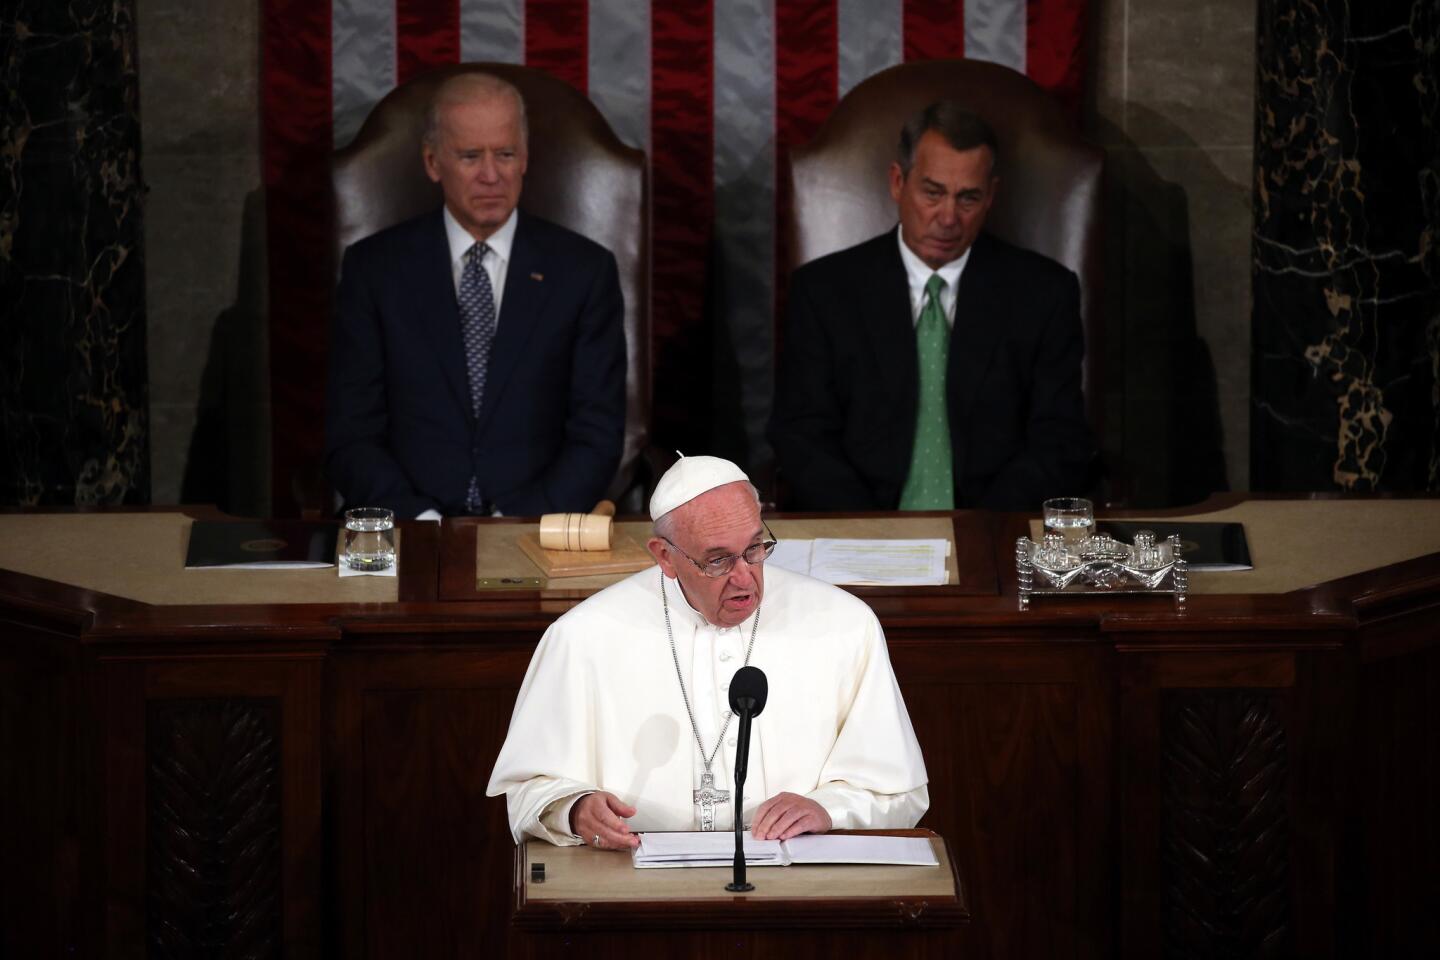 Pope Francis addresses a joint meeting of Congress in the House Chamber of the U.S. Capitol on Sept. 24, 2015.